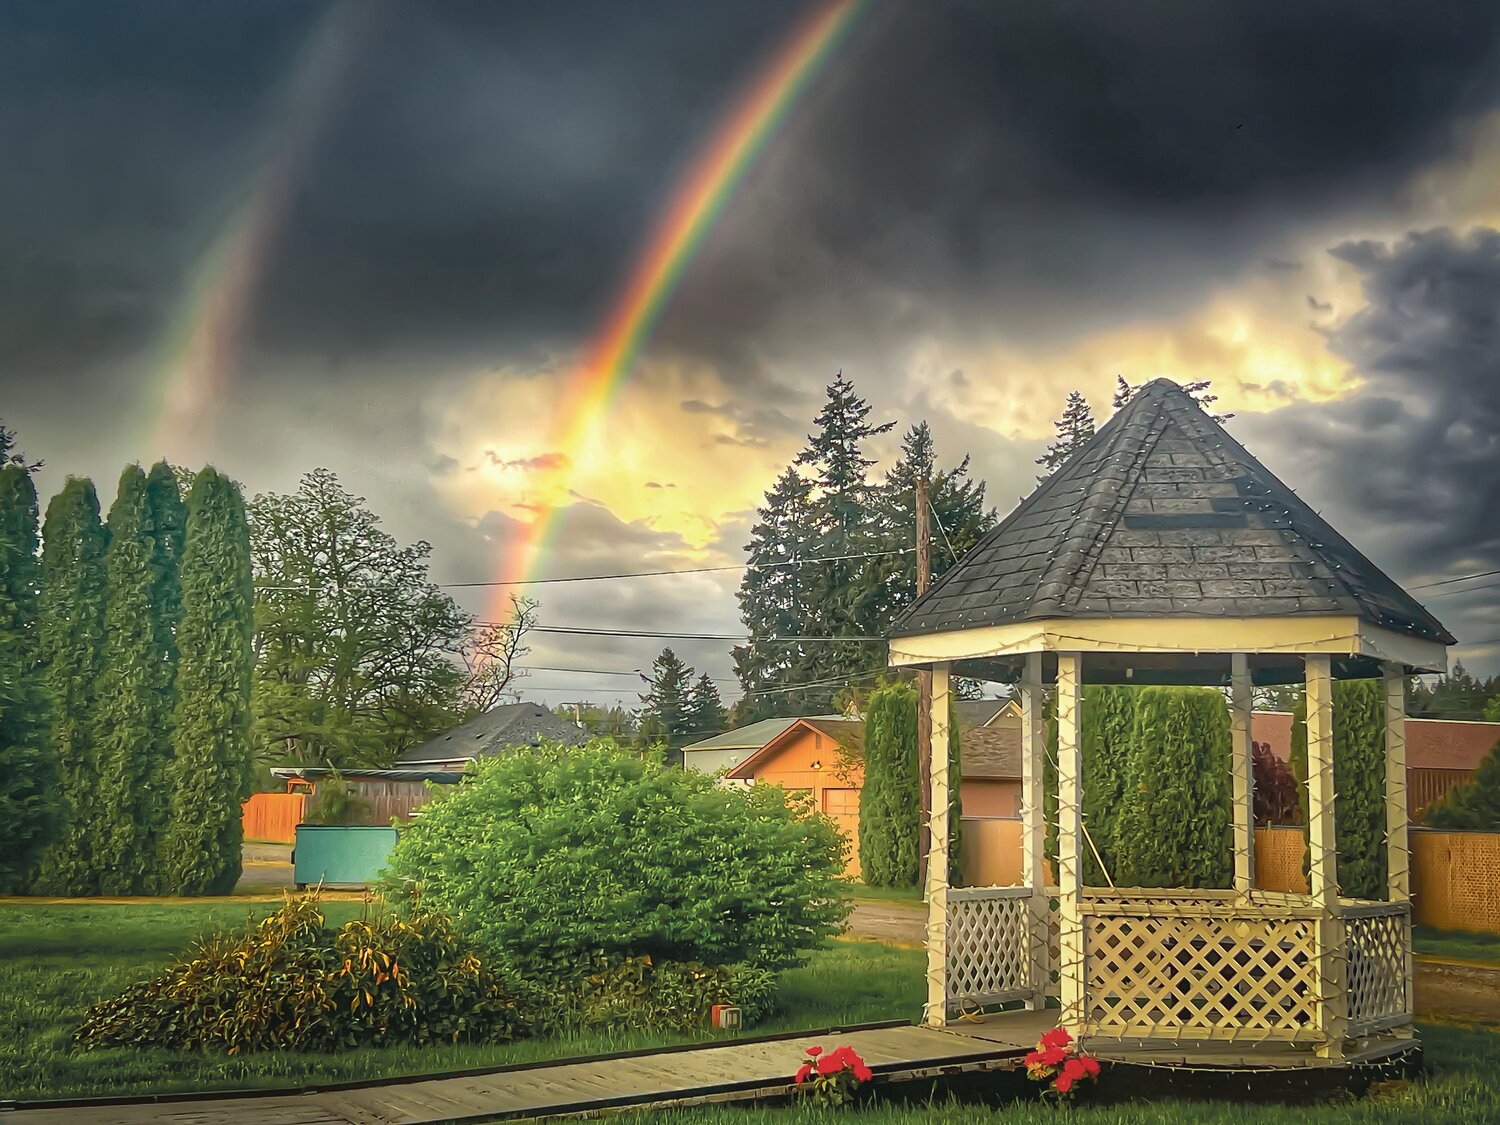 Mike Souci, with South Sound Aerials and Photography, sent this photo of a gazebo in Rainier following a severe thunderstorm in the area on Monday, May 15.